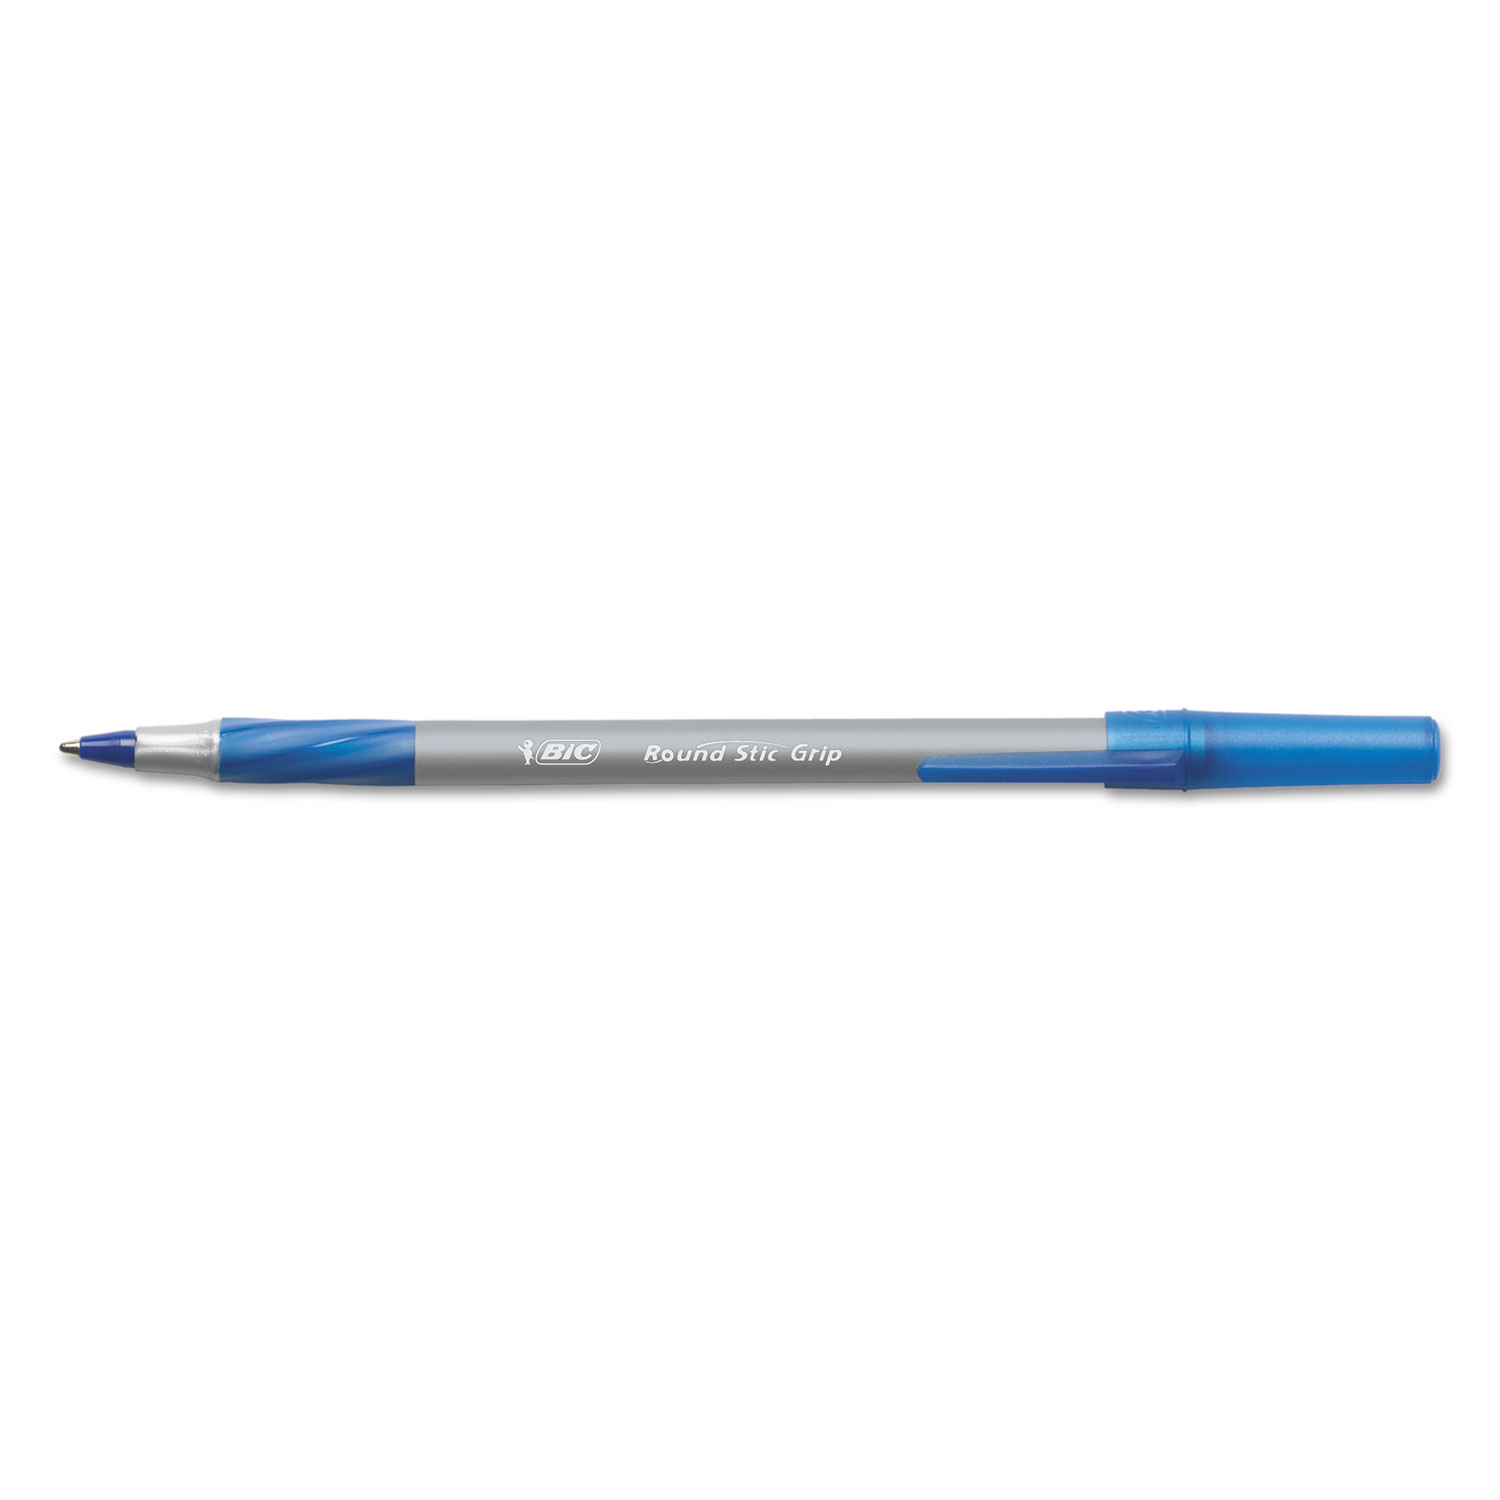  BIC GSMG361-BE Round Stic Grip Xtra Comfort Stick Ballpoint Pen, 1.2mm, Blue Ink, Gray Barrel, 36/Pack (BICGSMG361BE) 